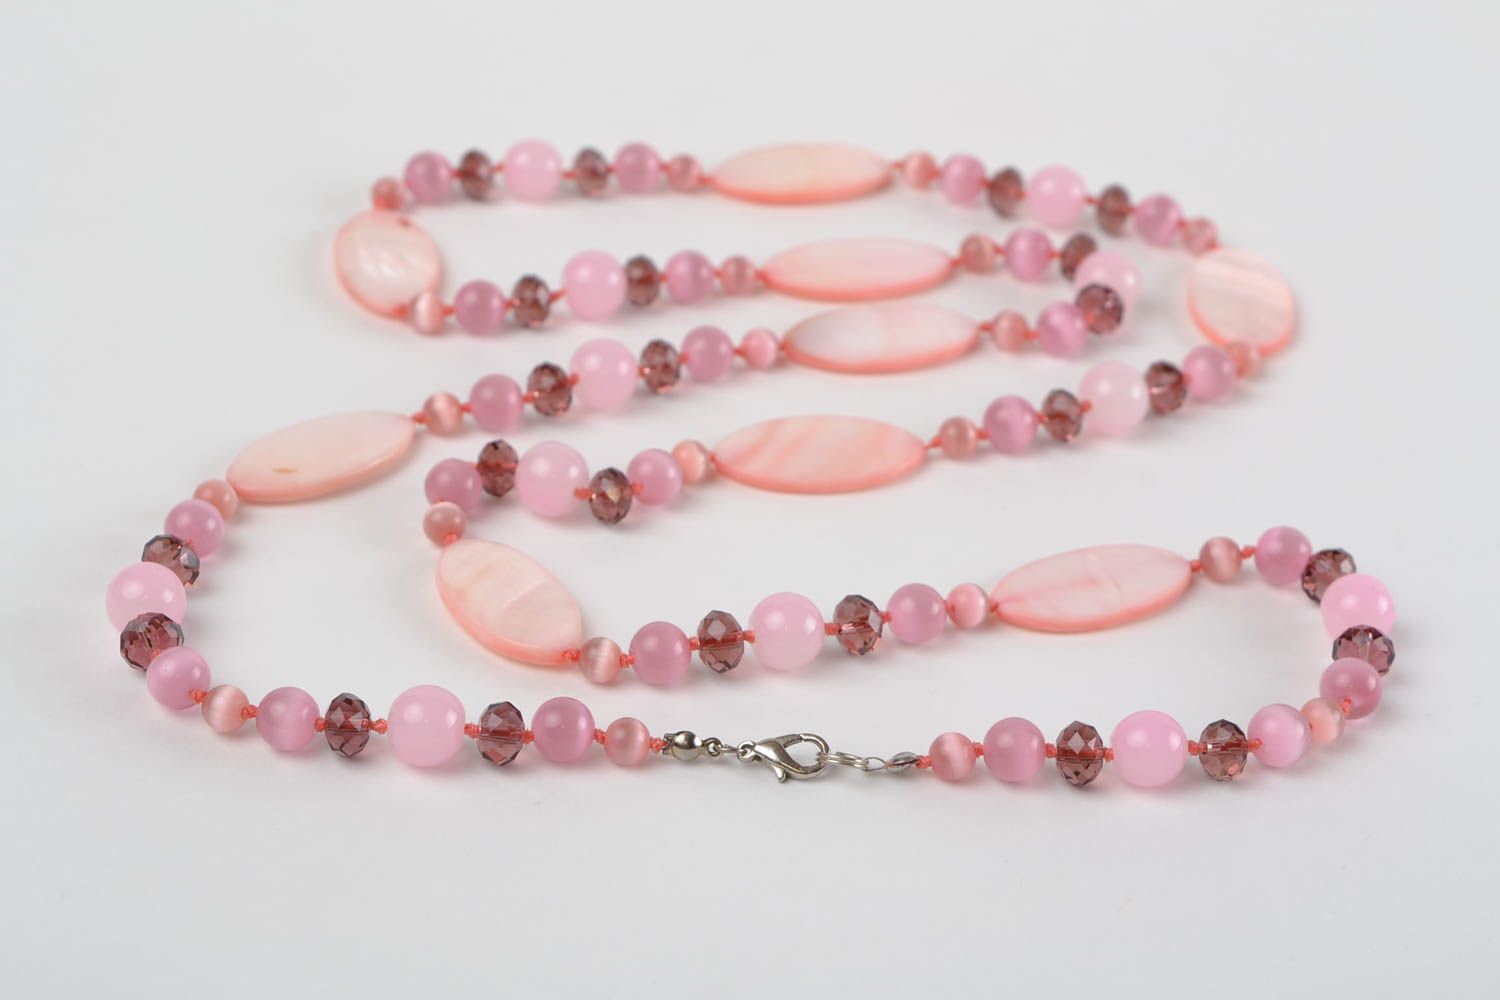 Pink handmade elegant necklace made of natural stone and Czech glass photo 4